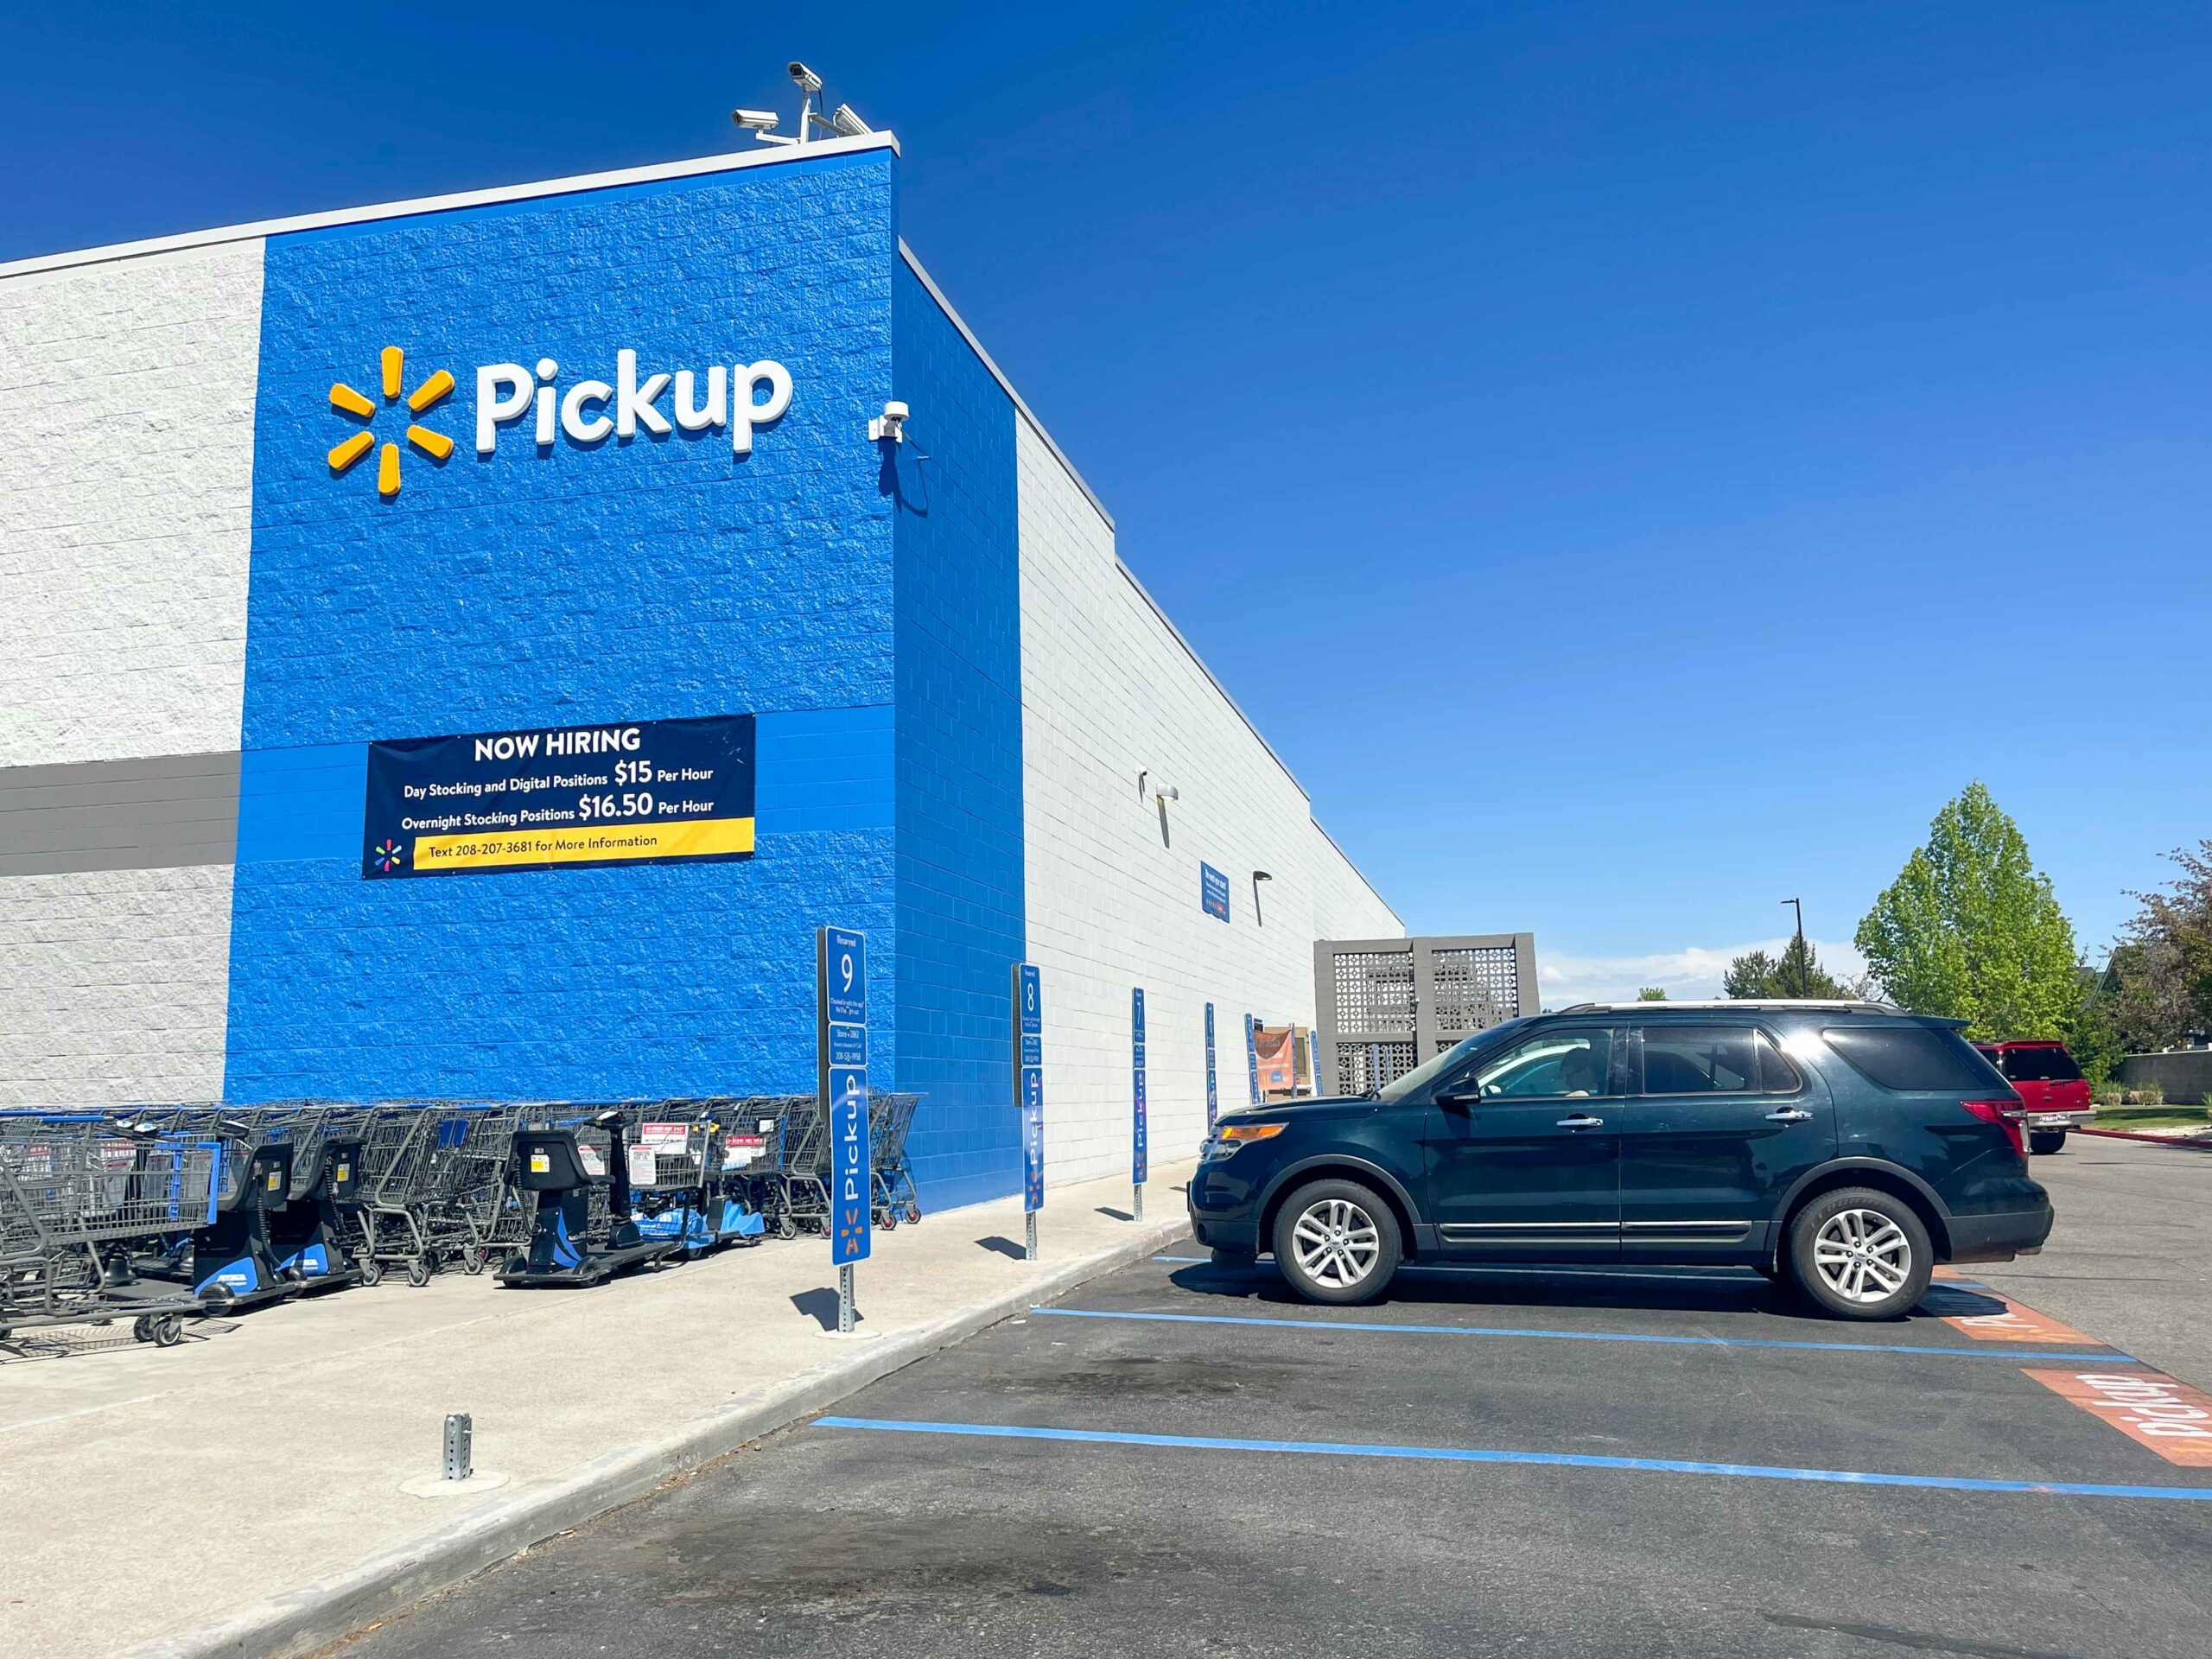 How Much Does Pickup Cost at Walmart